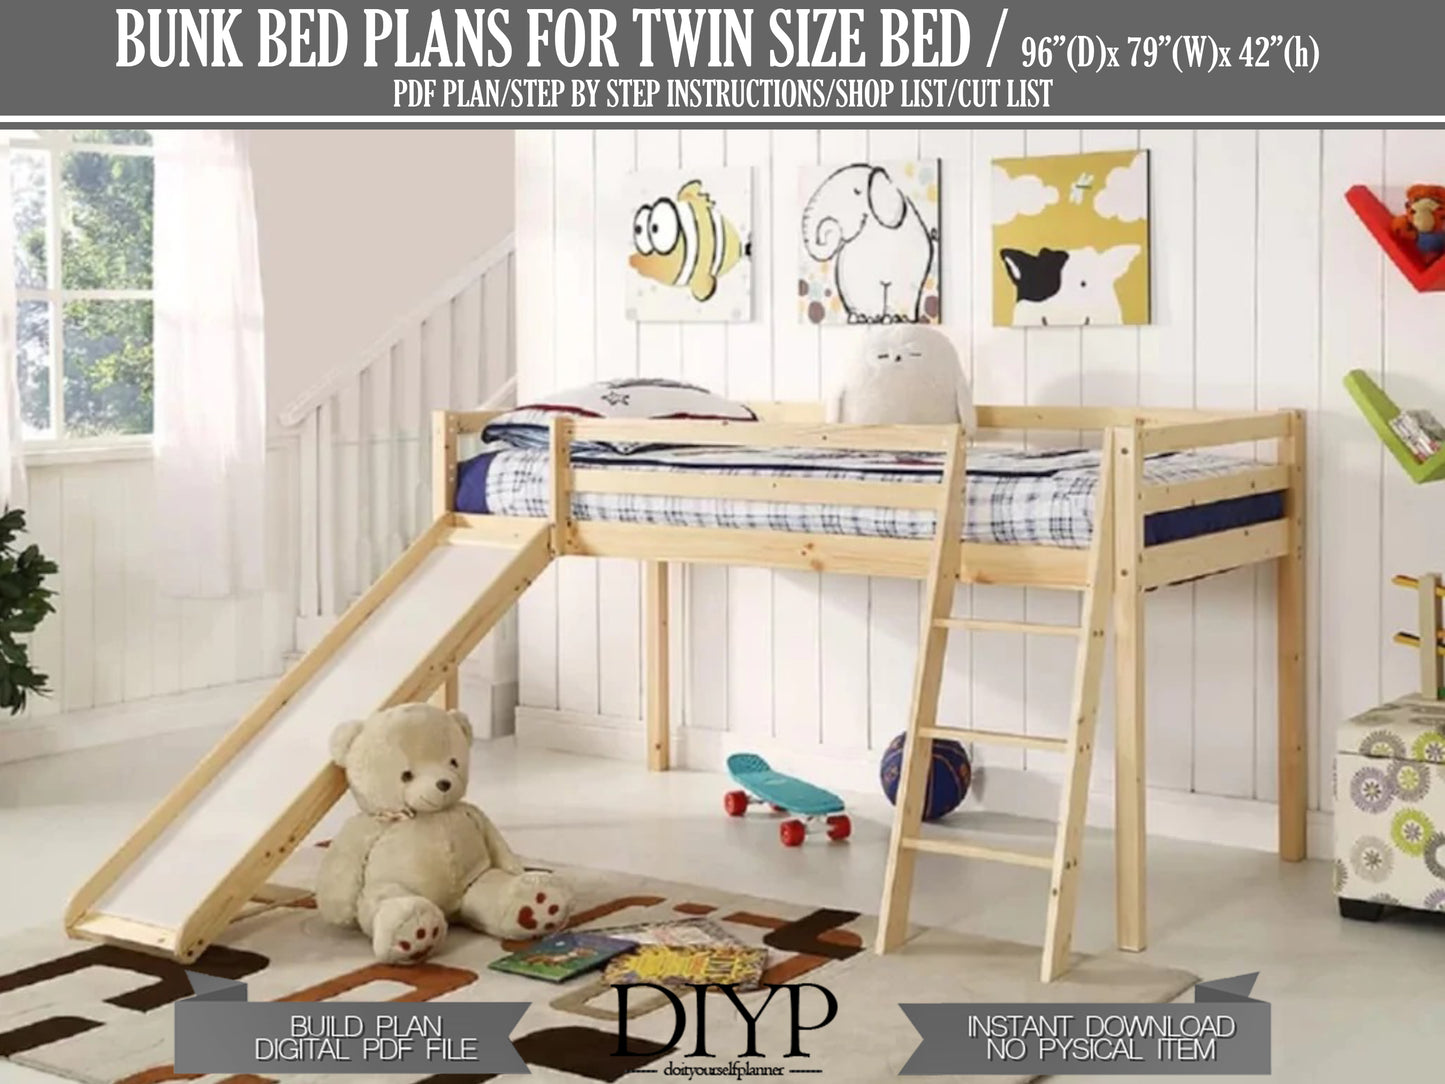 Adventure Awaits: DIY Twin Size Bunk Bed Plans with Slides | Craftsmanship and Fun Combined